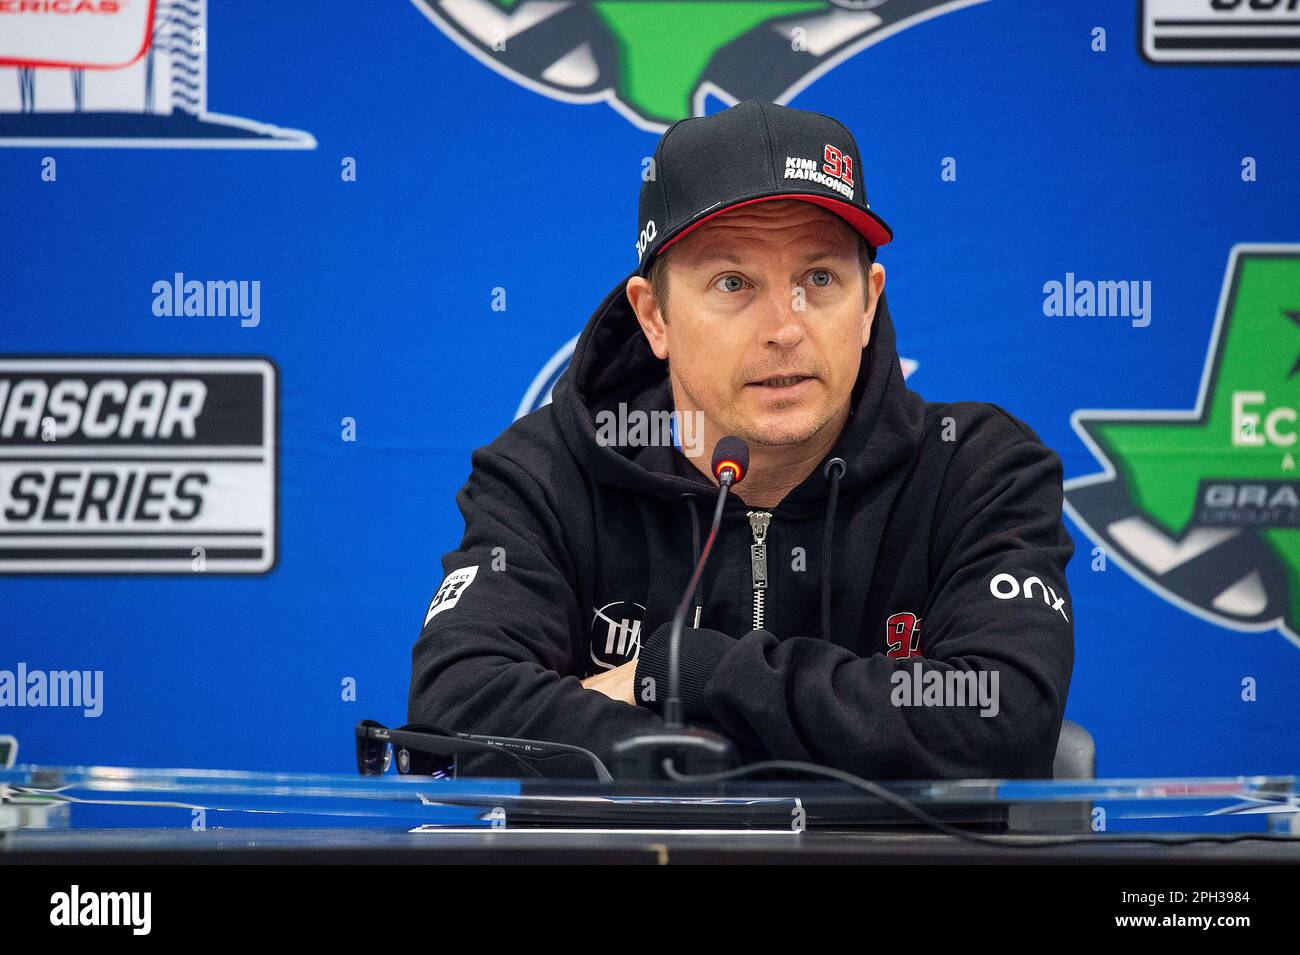 The Americas. 25th Mar, 2023. Kimi Raikkonen (91) with Trackhouse Racing at press conference prior to the EchoPark Automotive Grand Prix, Circuit of The Americas. Austin, Texas. Mario Cantu/CSM/Alamy Live News Stock Photo